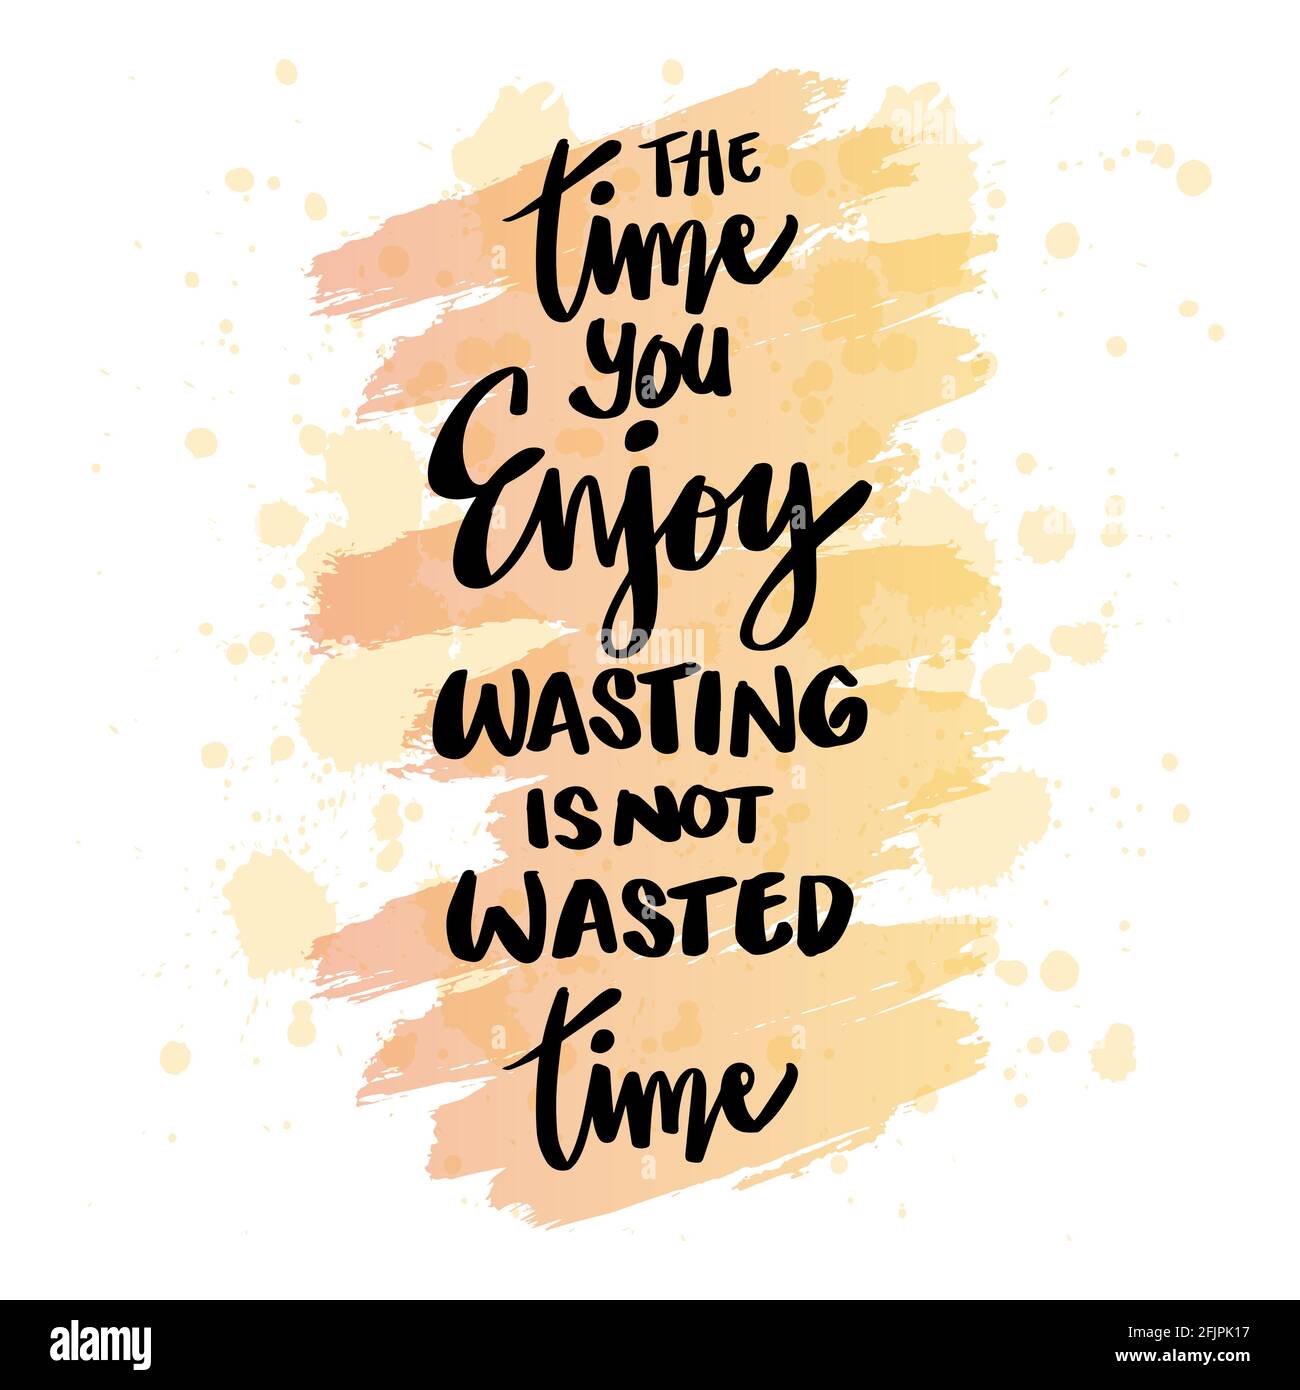 Time you enjoy wasting is not wasted time. Motivational quote. Stock Photo